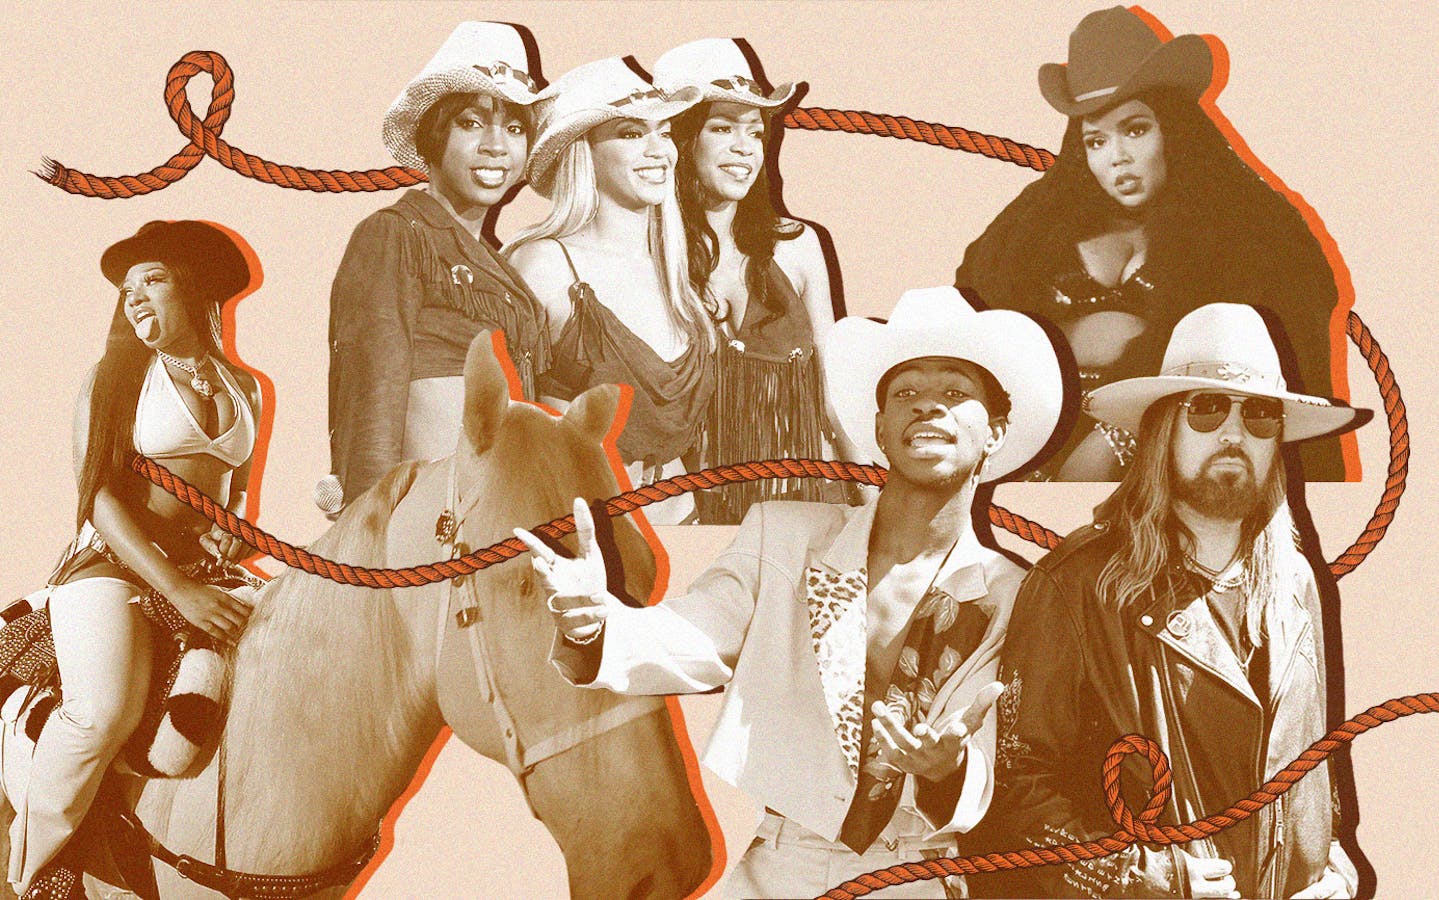 Fashion's Gone Country. How Can a Texan Stand Out? – Texas Monthly